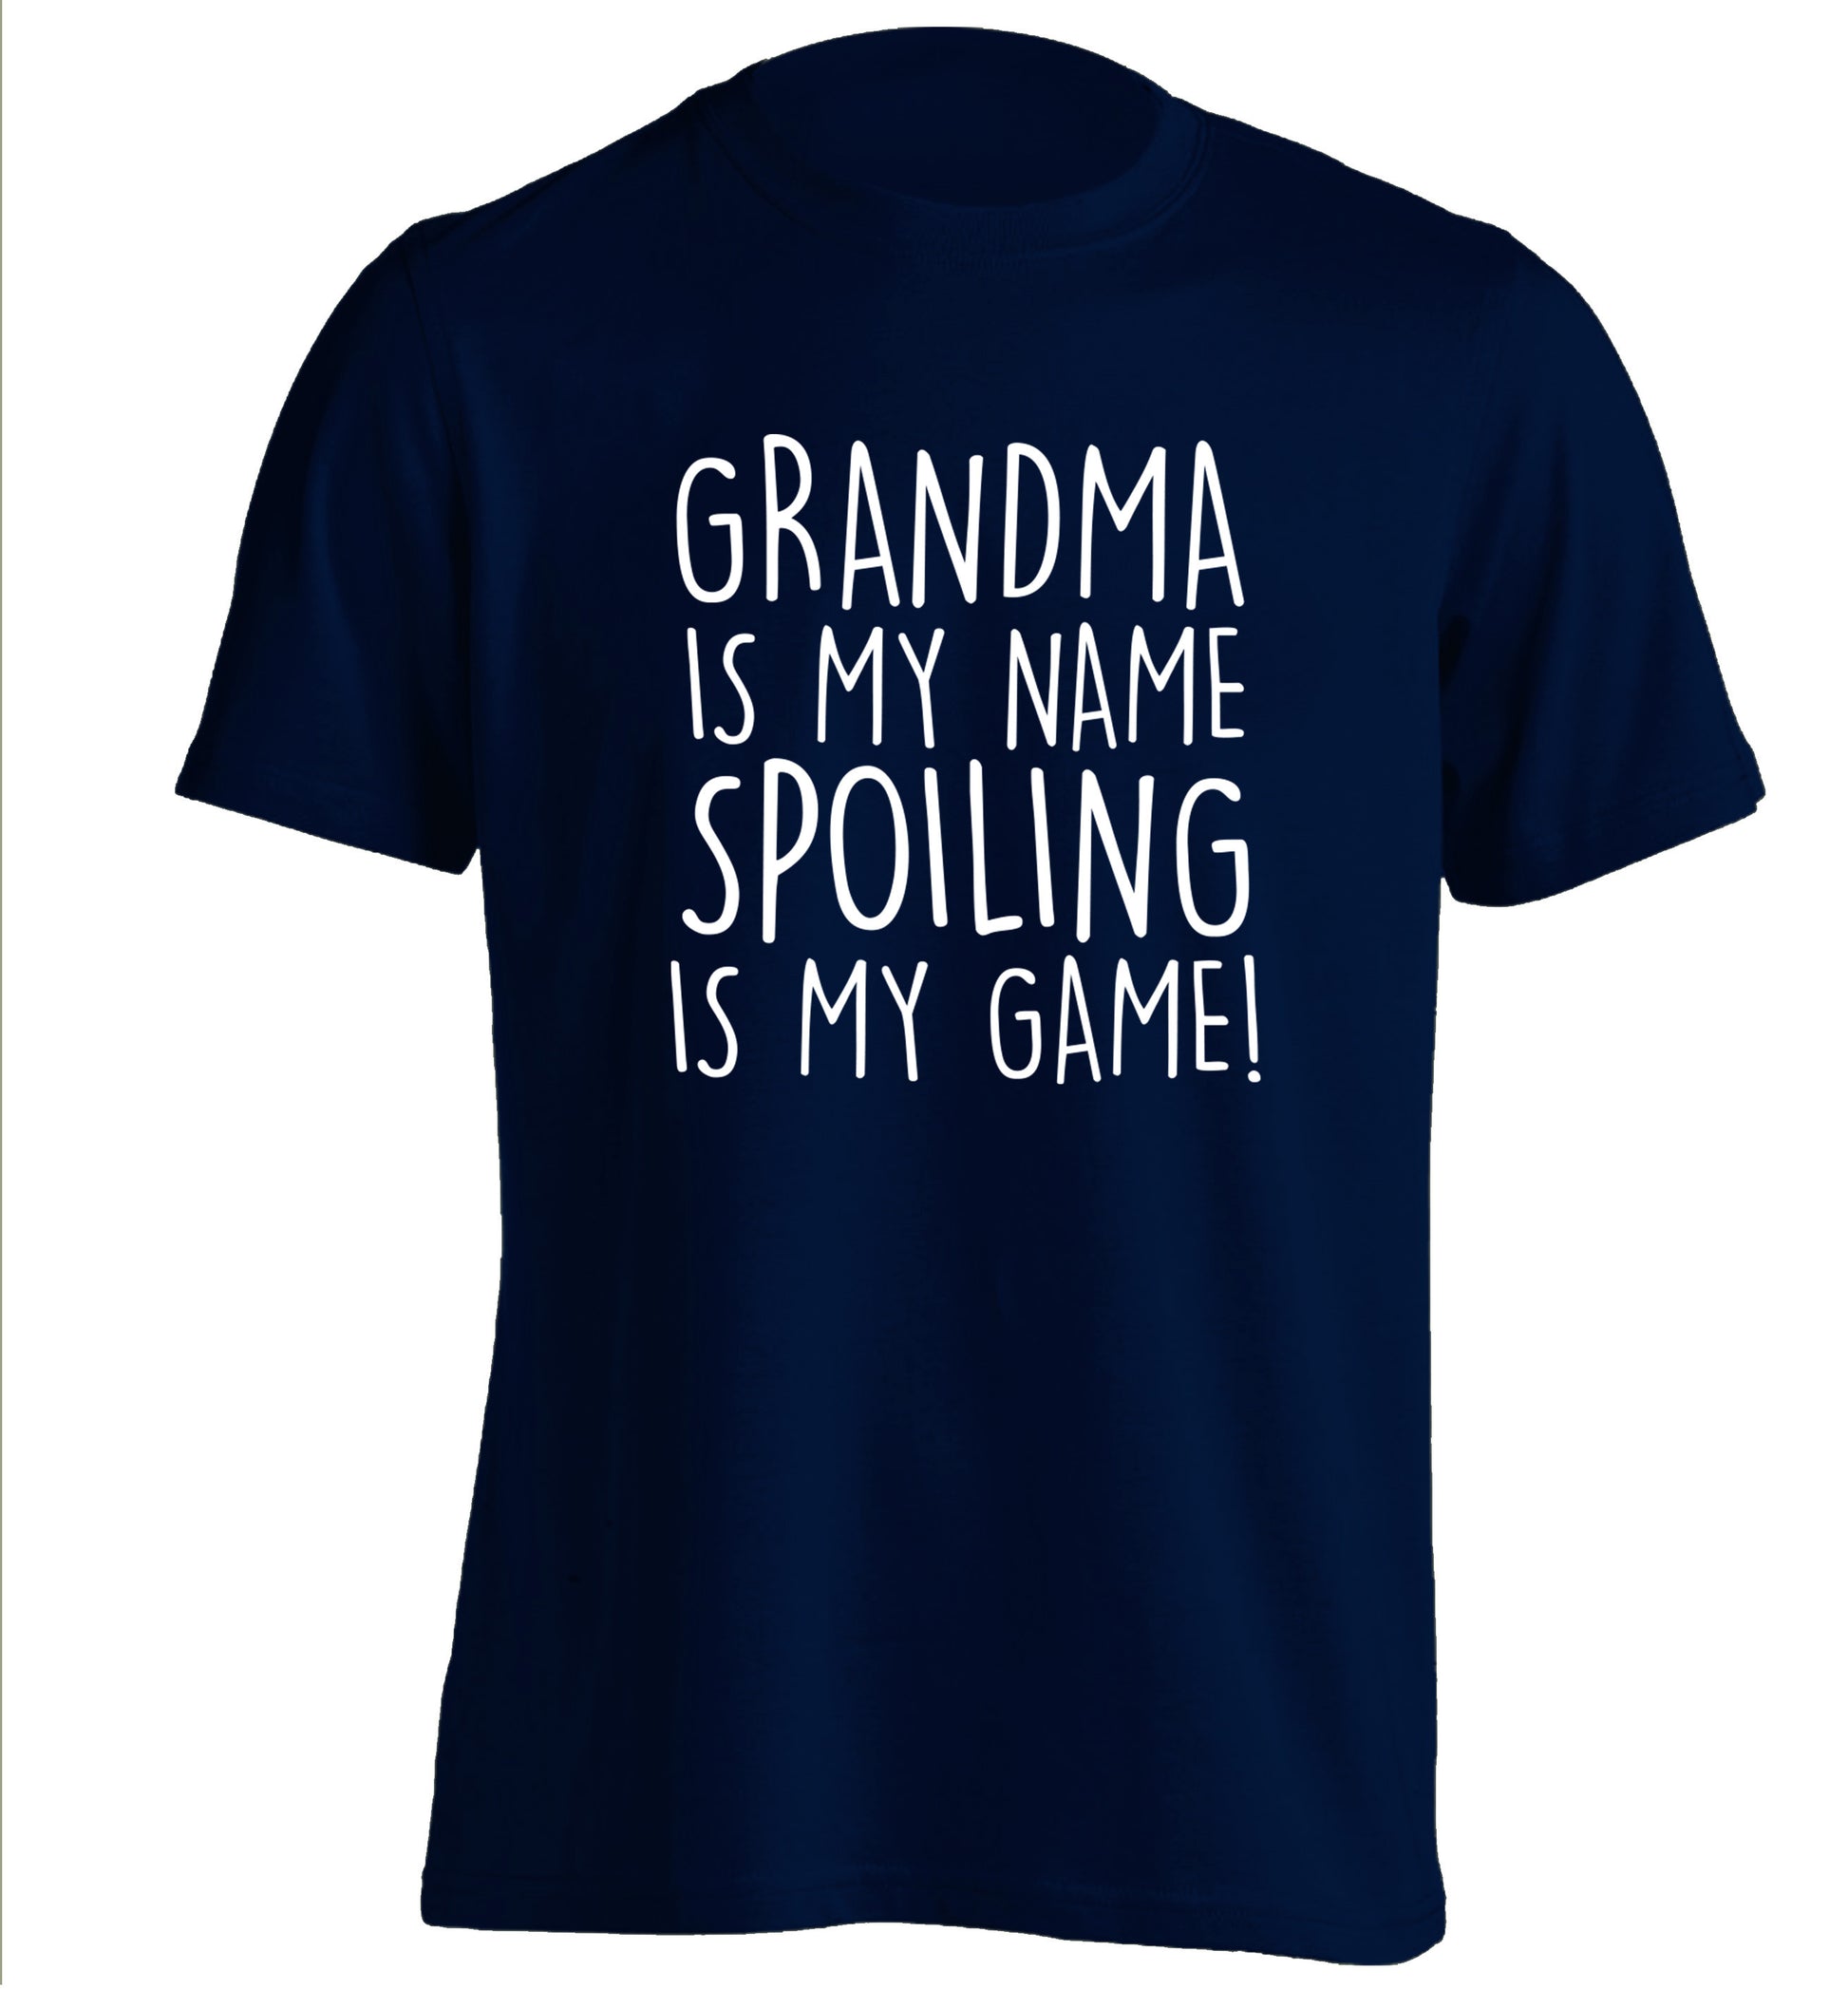 Grandma is my name, spoiling is my game adults unisex navy Tshirt 2XL